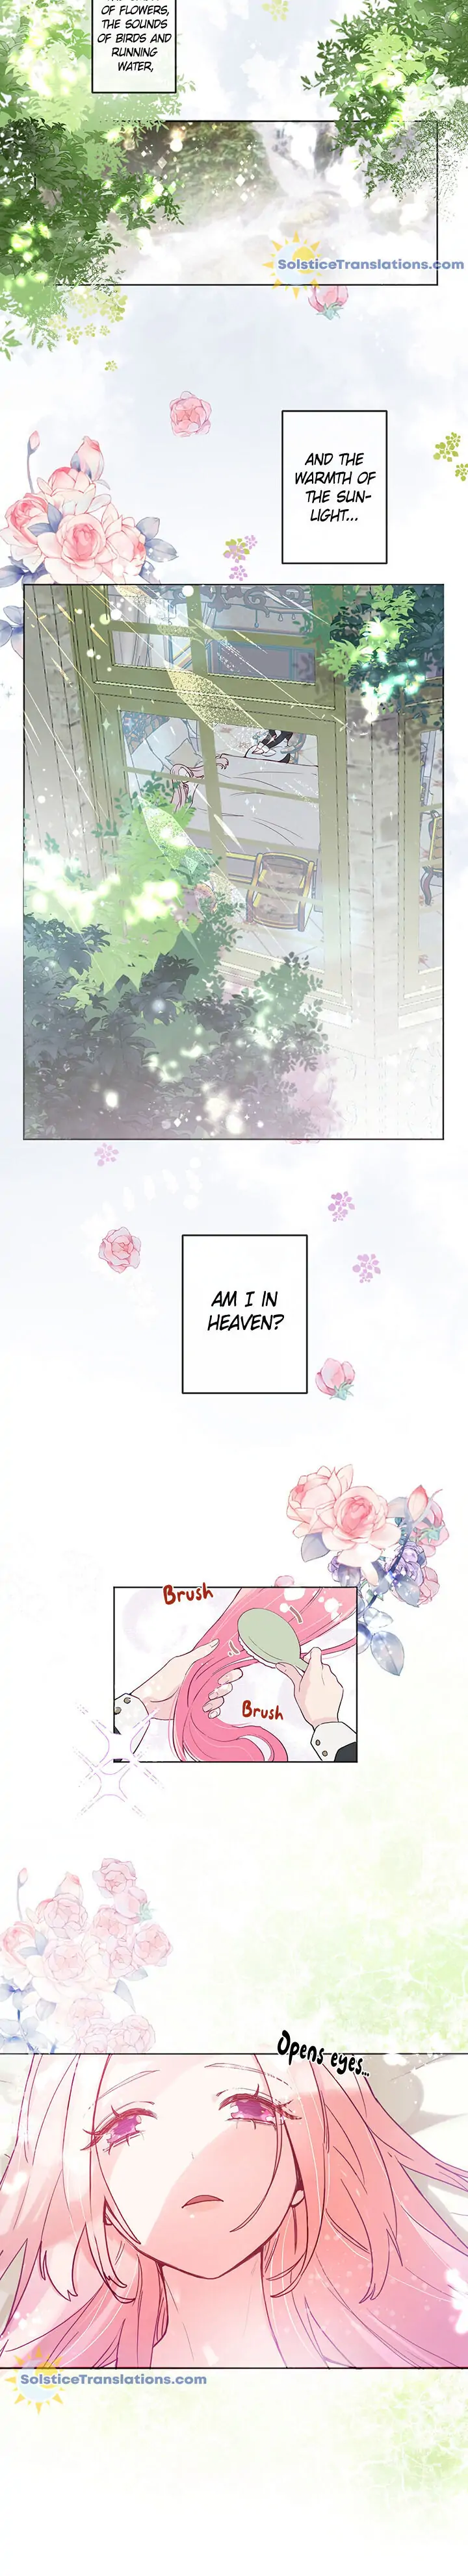 The Flower of Heaven chapter 1